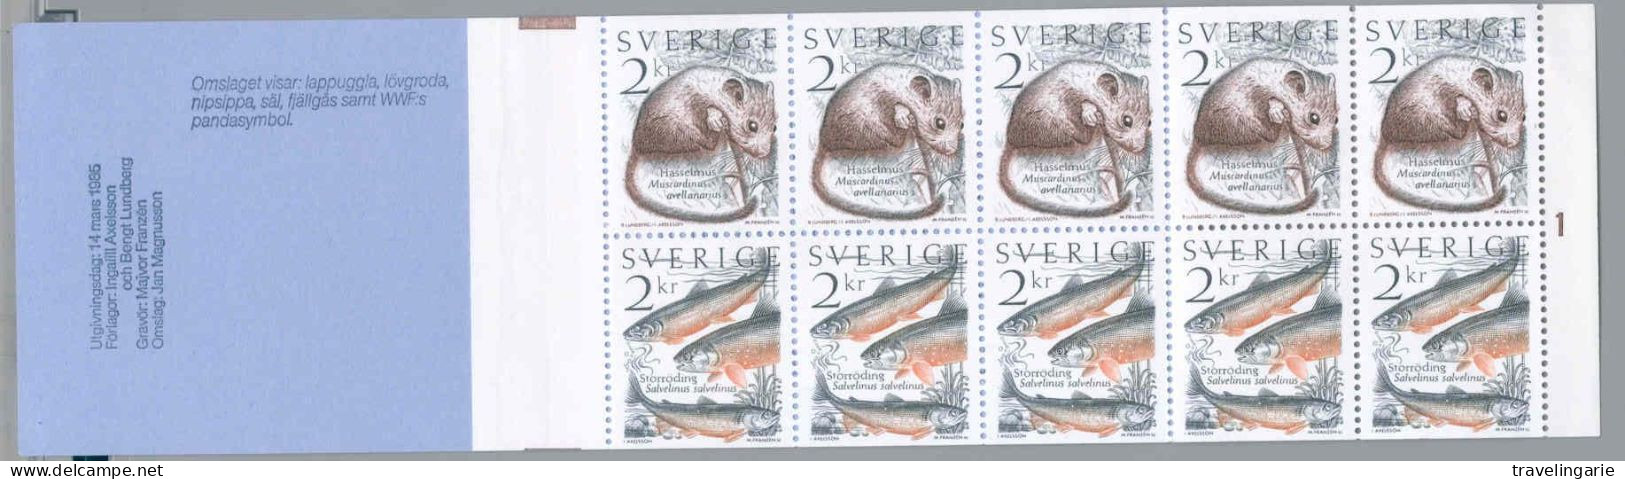 Sweden 1985 Stamp Booklet Living Nature With WWF Panda On Cover MNH ** - Nuevos